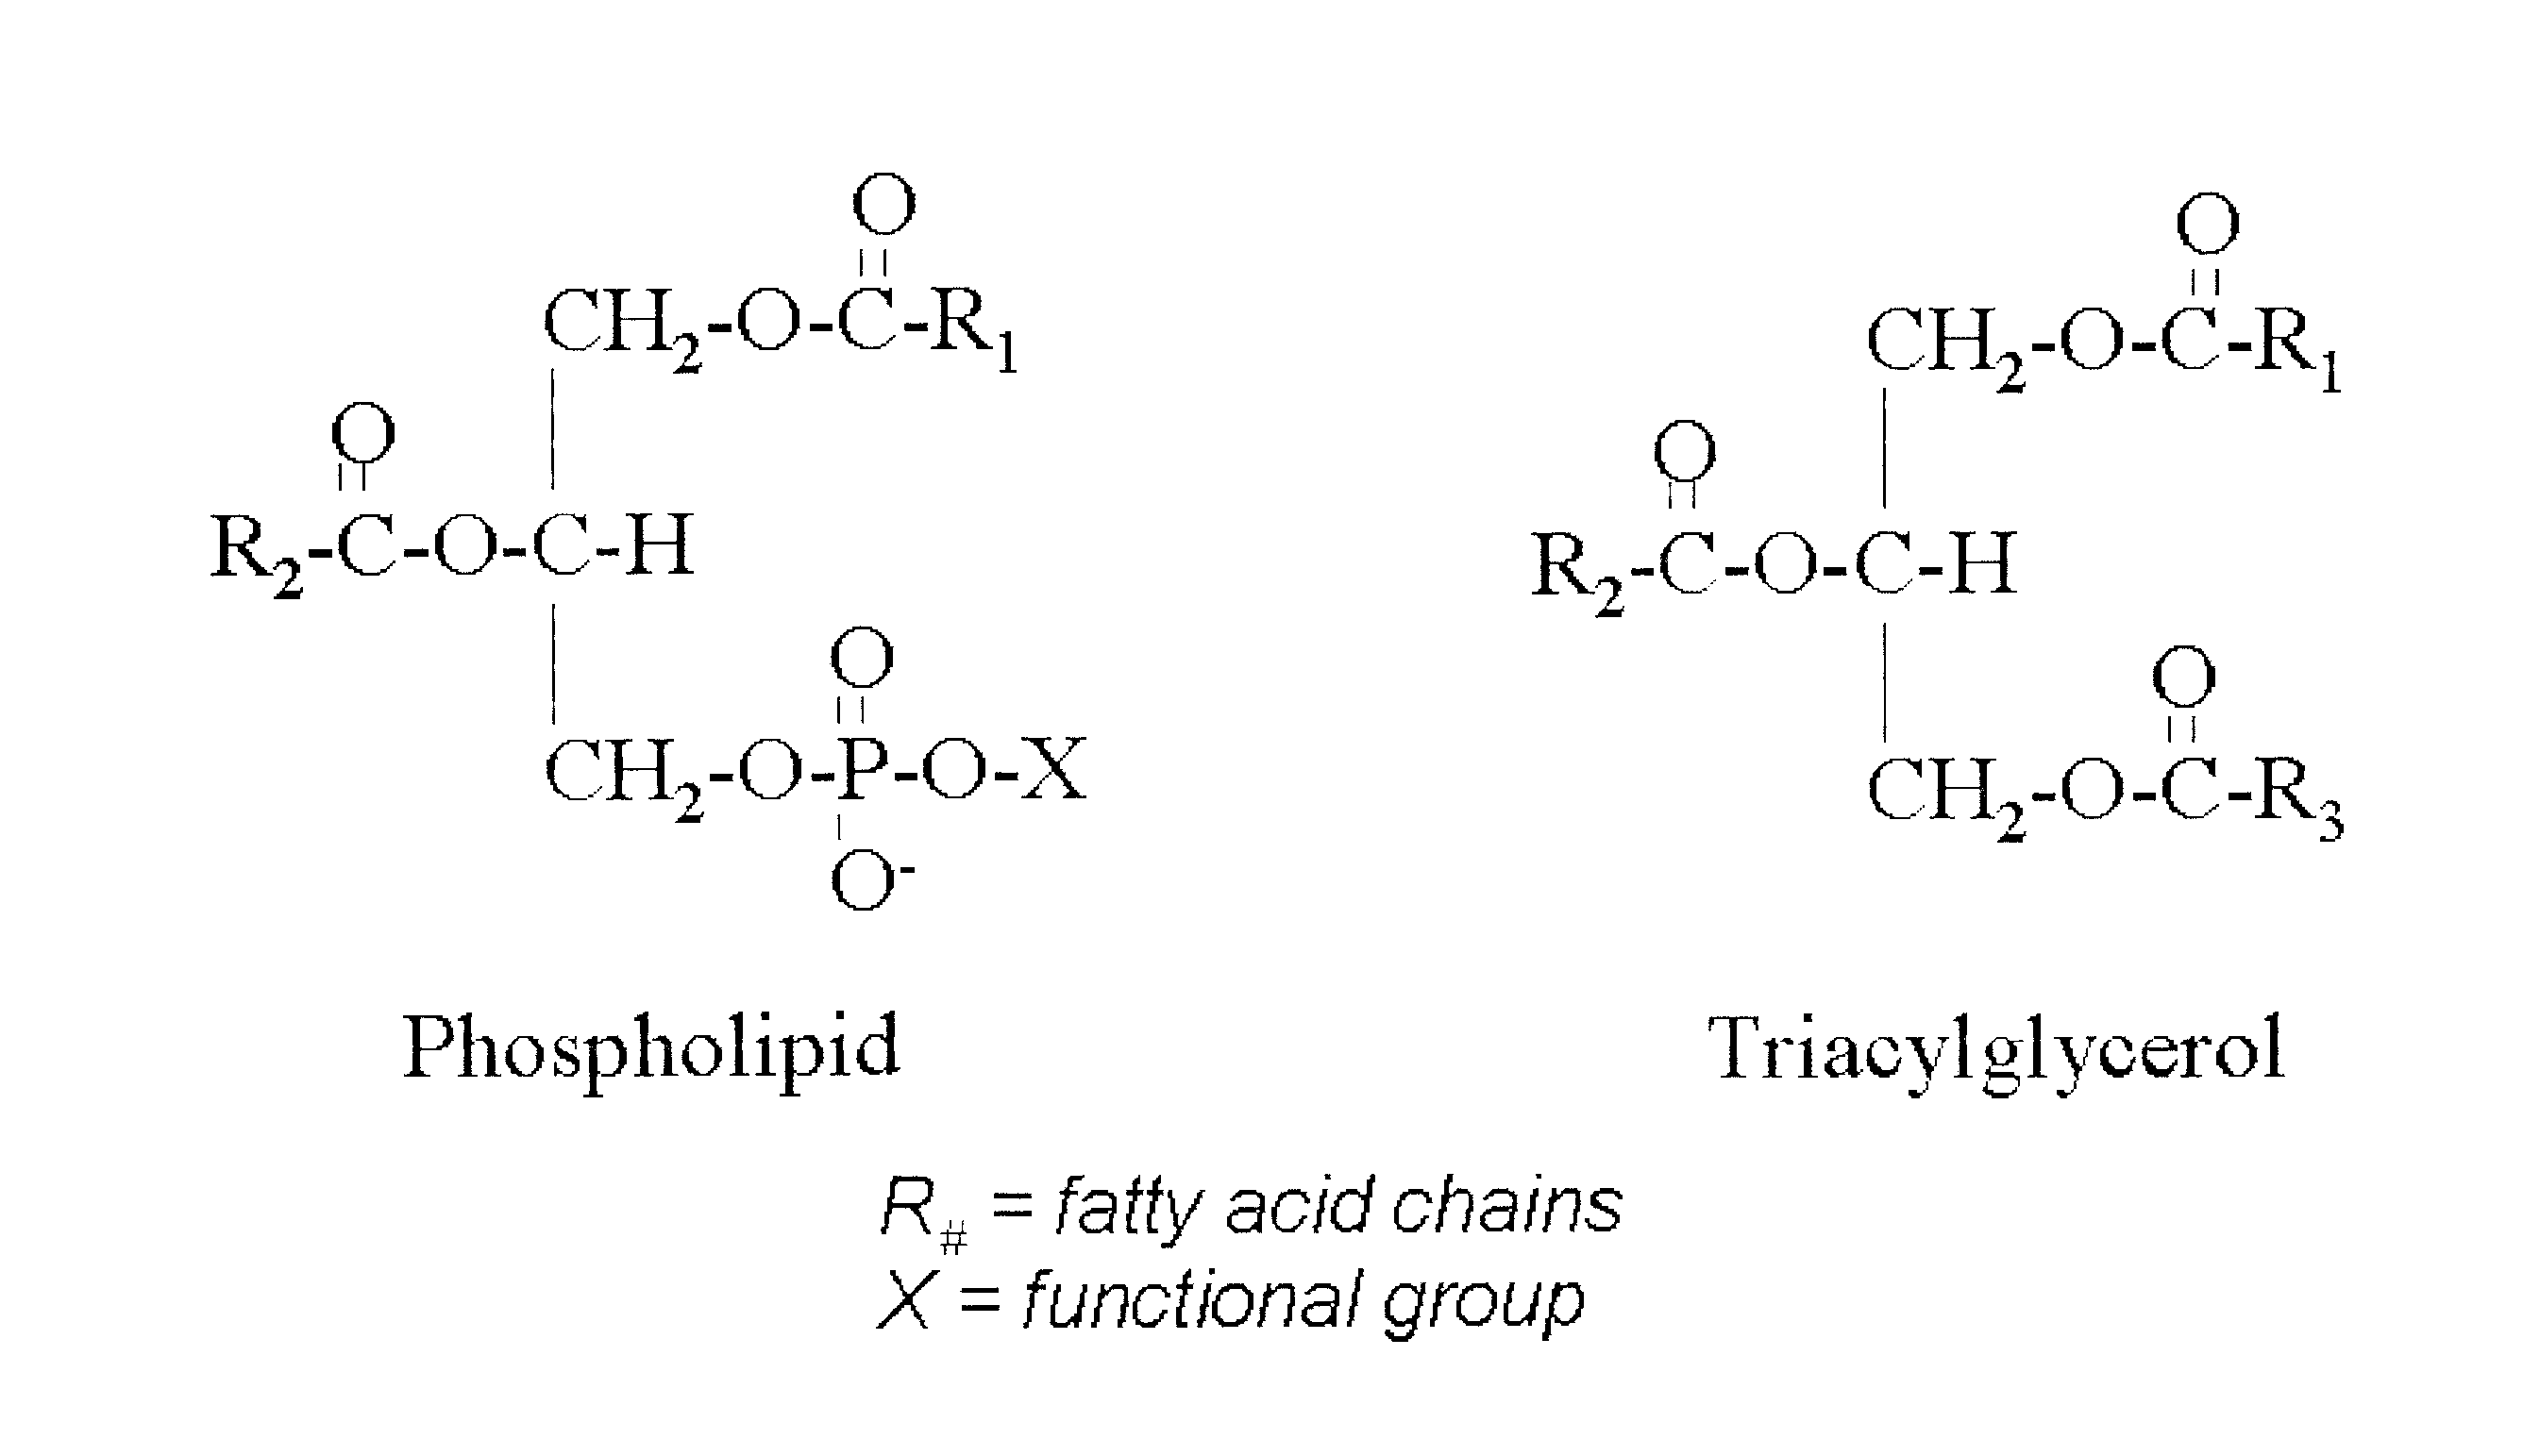 Generation of Triacylglycerols from Gums